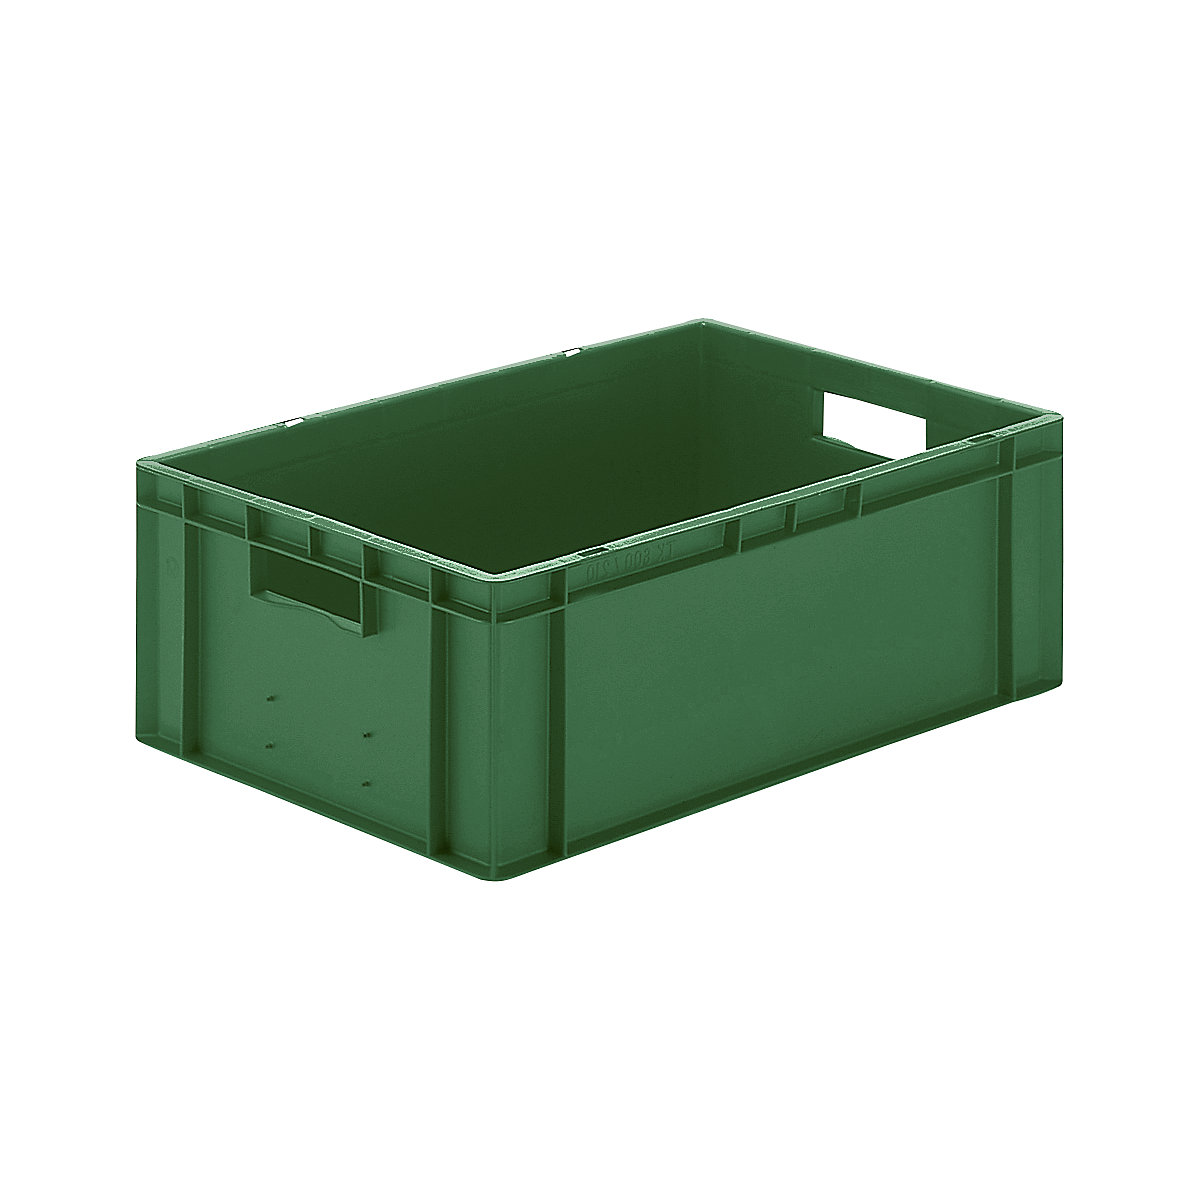 Euro stacking container, closed walls and base, LxWxH 600 x 400 x 210 mm, green, pack of 5-7